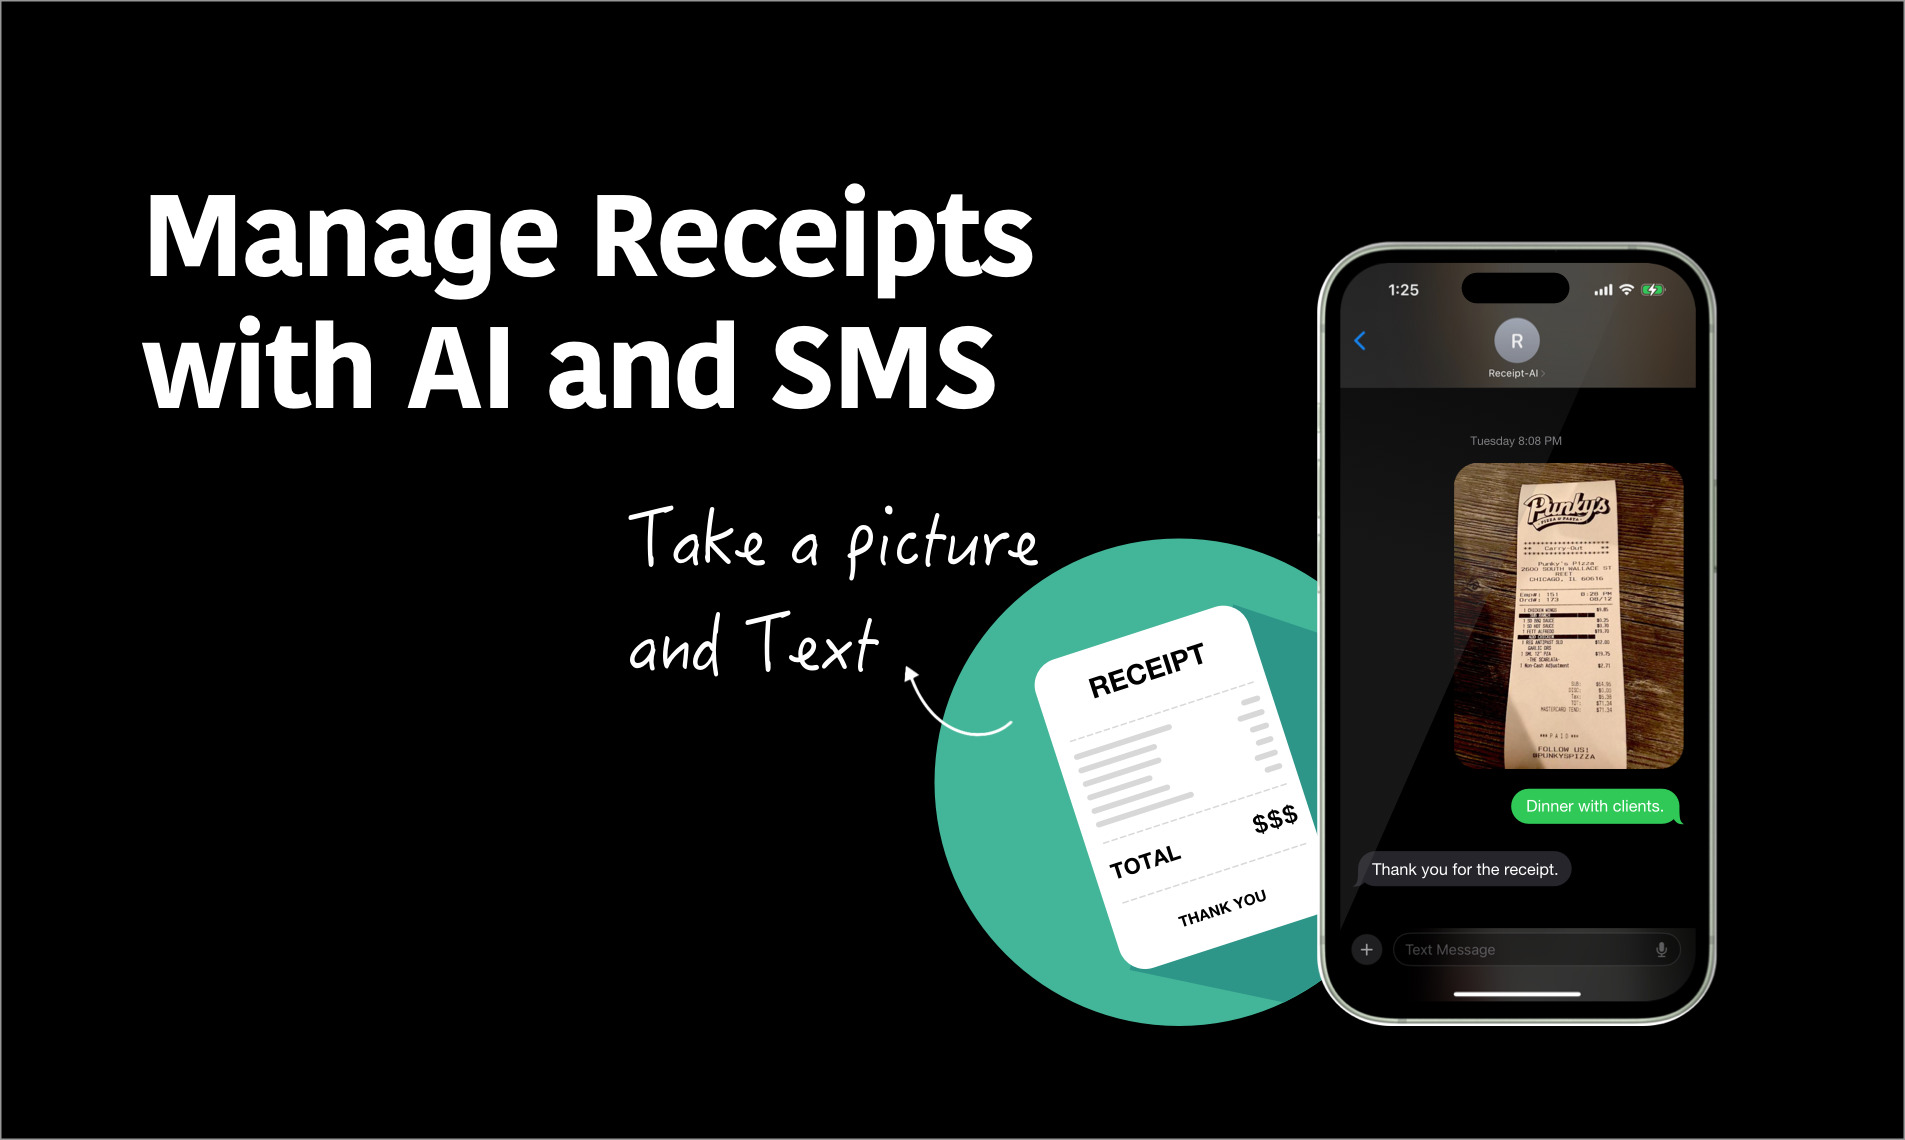 Receipt-AI, an app for easy receipt management. On the left, bold text states 'Receipt management made simple.' To the right, a smartphone displays the app interface with a photo of a receipt, and a caption 'Take a picture and send' with an arrow pointing to the receipt. The background is a light green gradient, and there's an illustrative receipt unrolling and winding towards the phone, suggesting the ease of uploading receipts to Xero and QuickBooks using SMS.